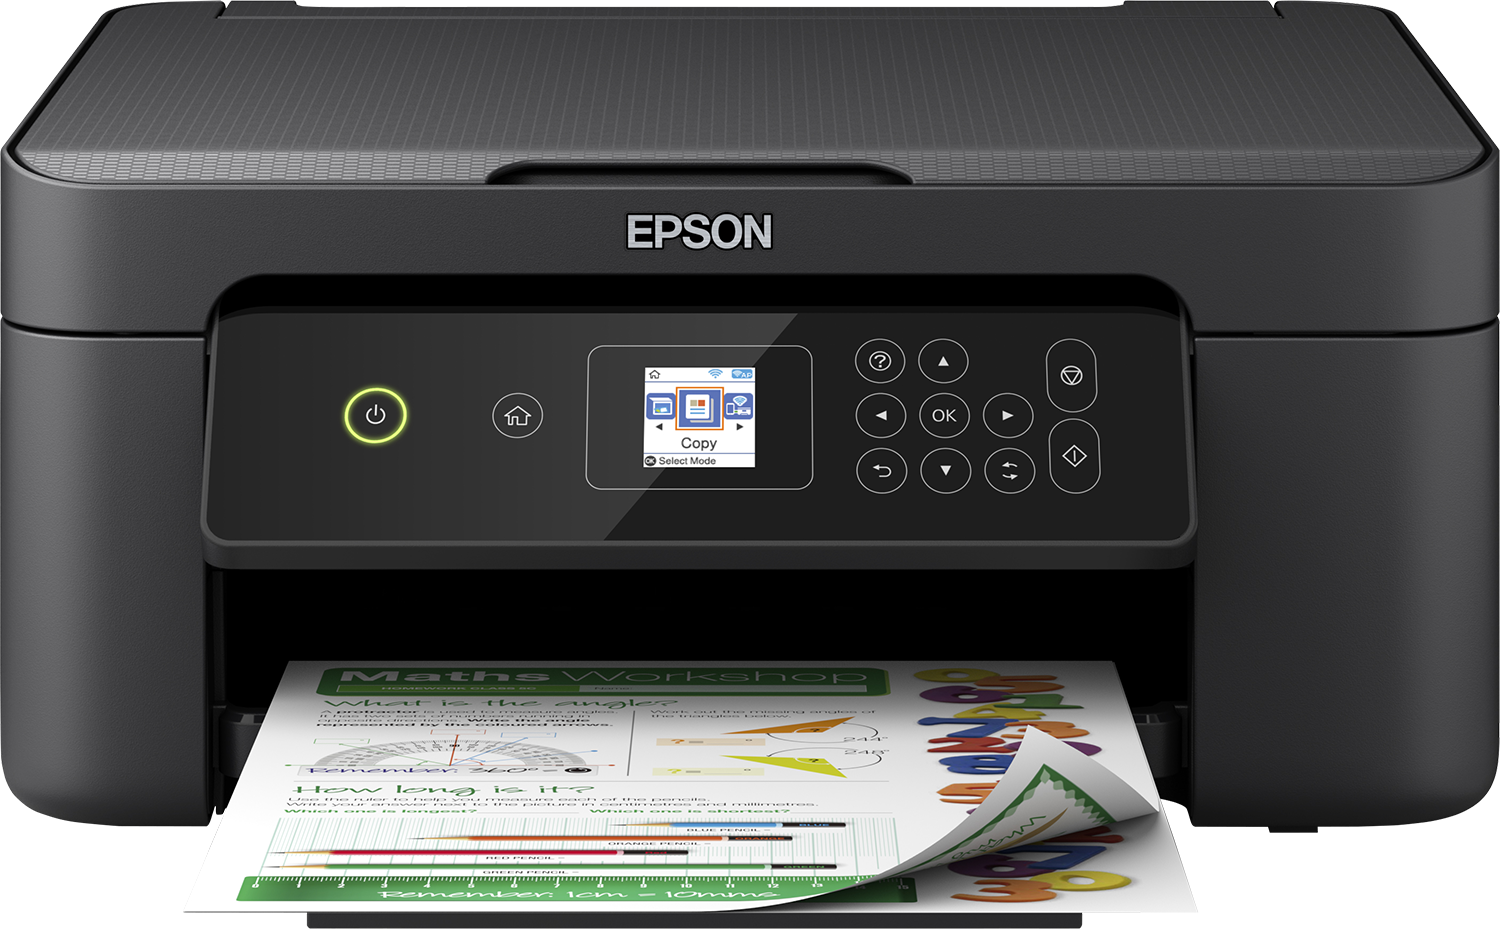 Step-by-step Driver Epson Printer L3150/L3160 Kali Linux Installation - Featured